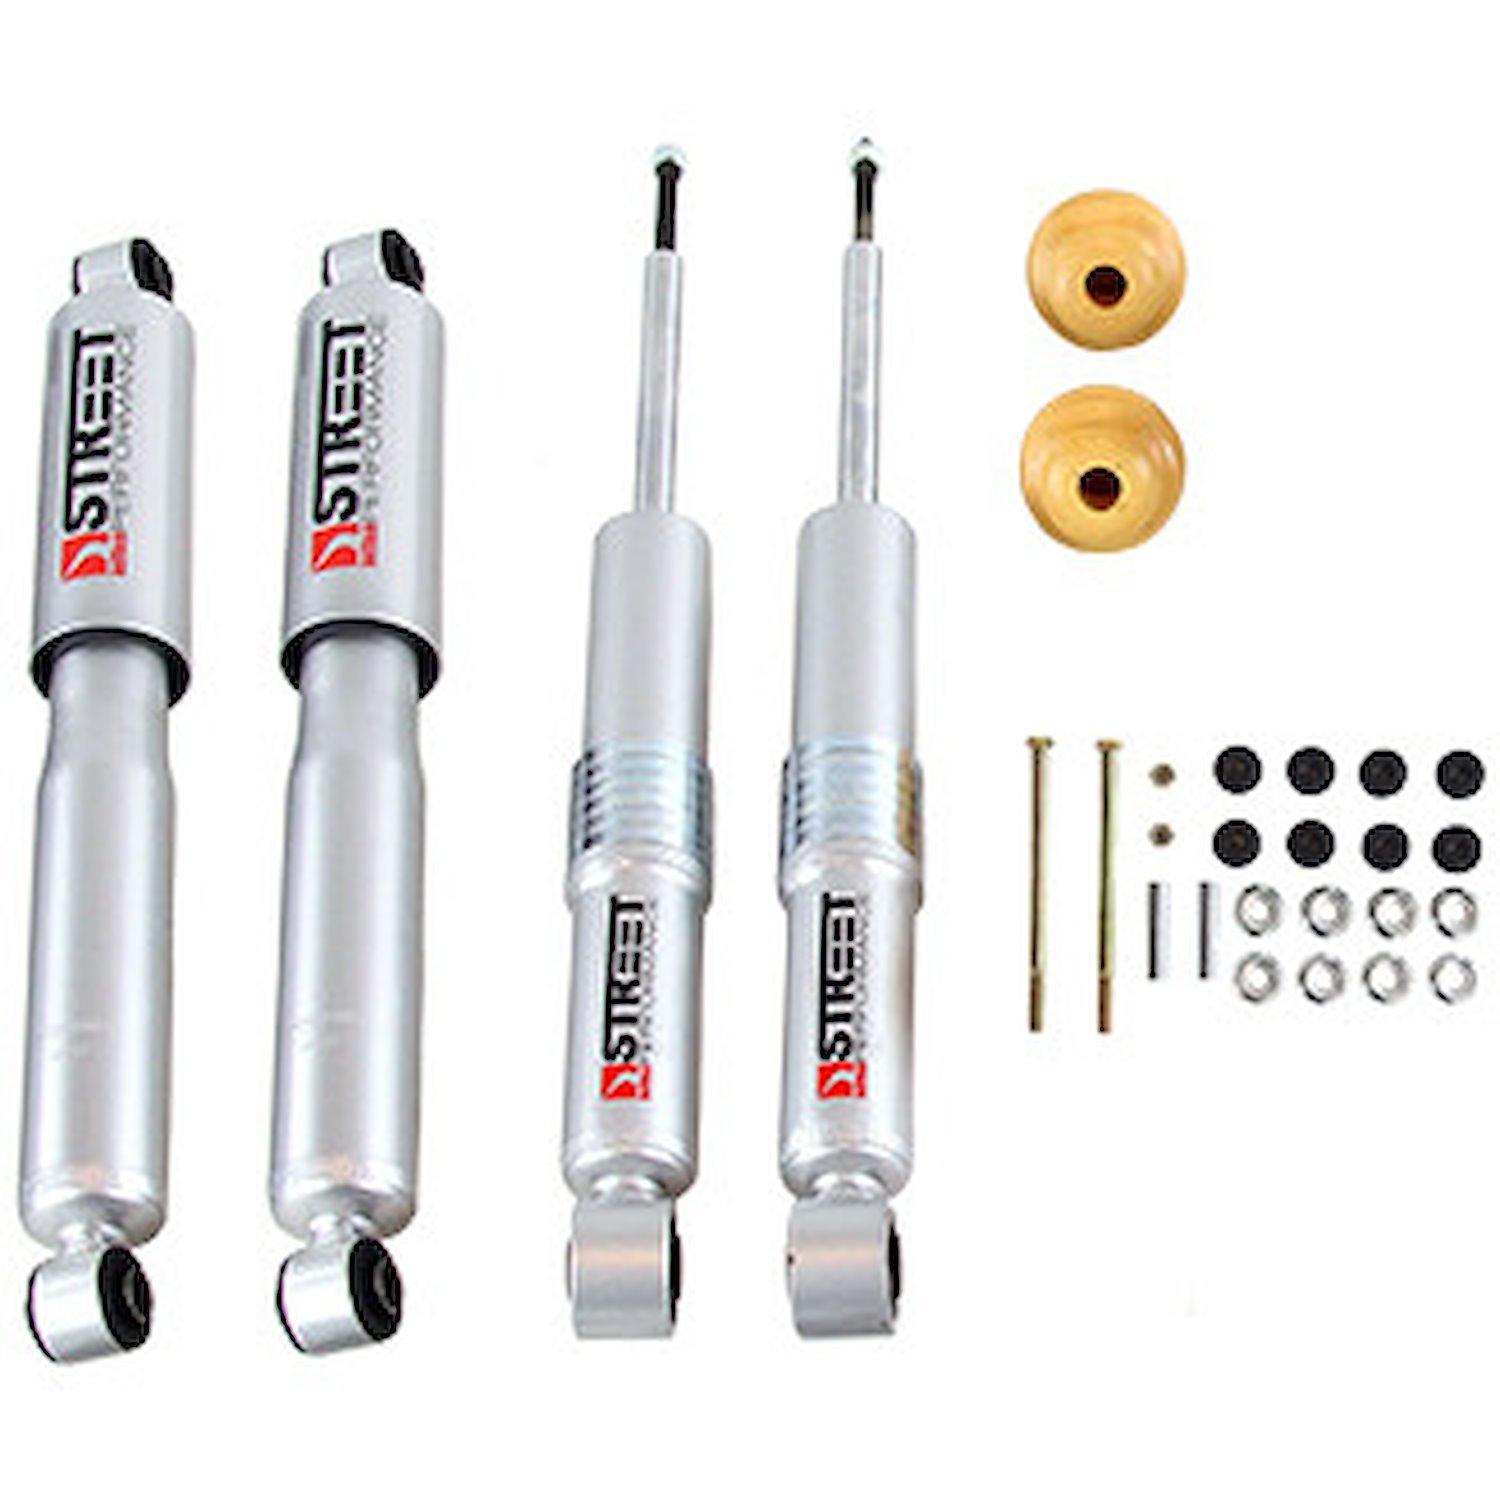 Street Performance OEM Shock Absorber Set for 2015-2017 Chevy Colorado/GMC Canyon